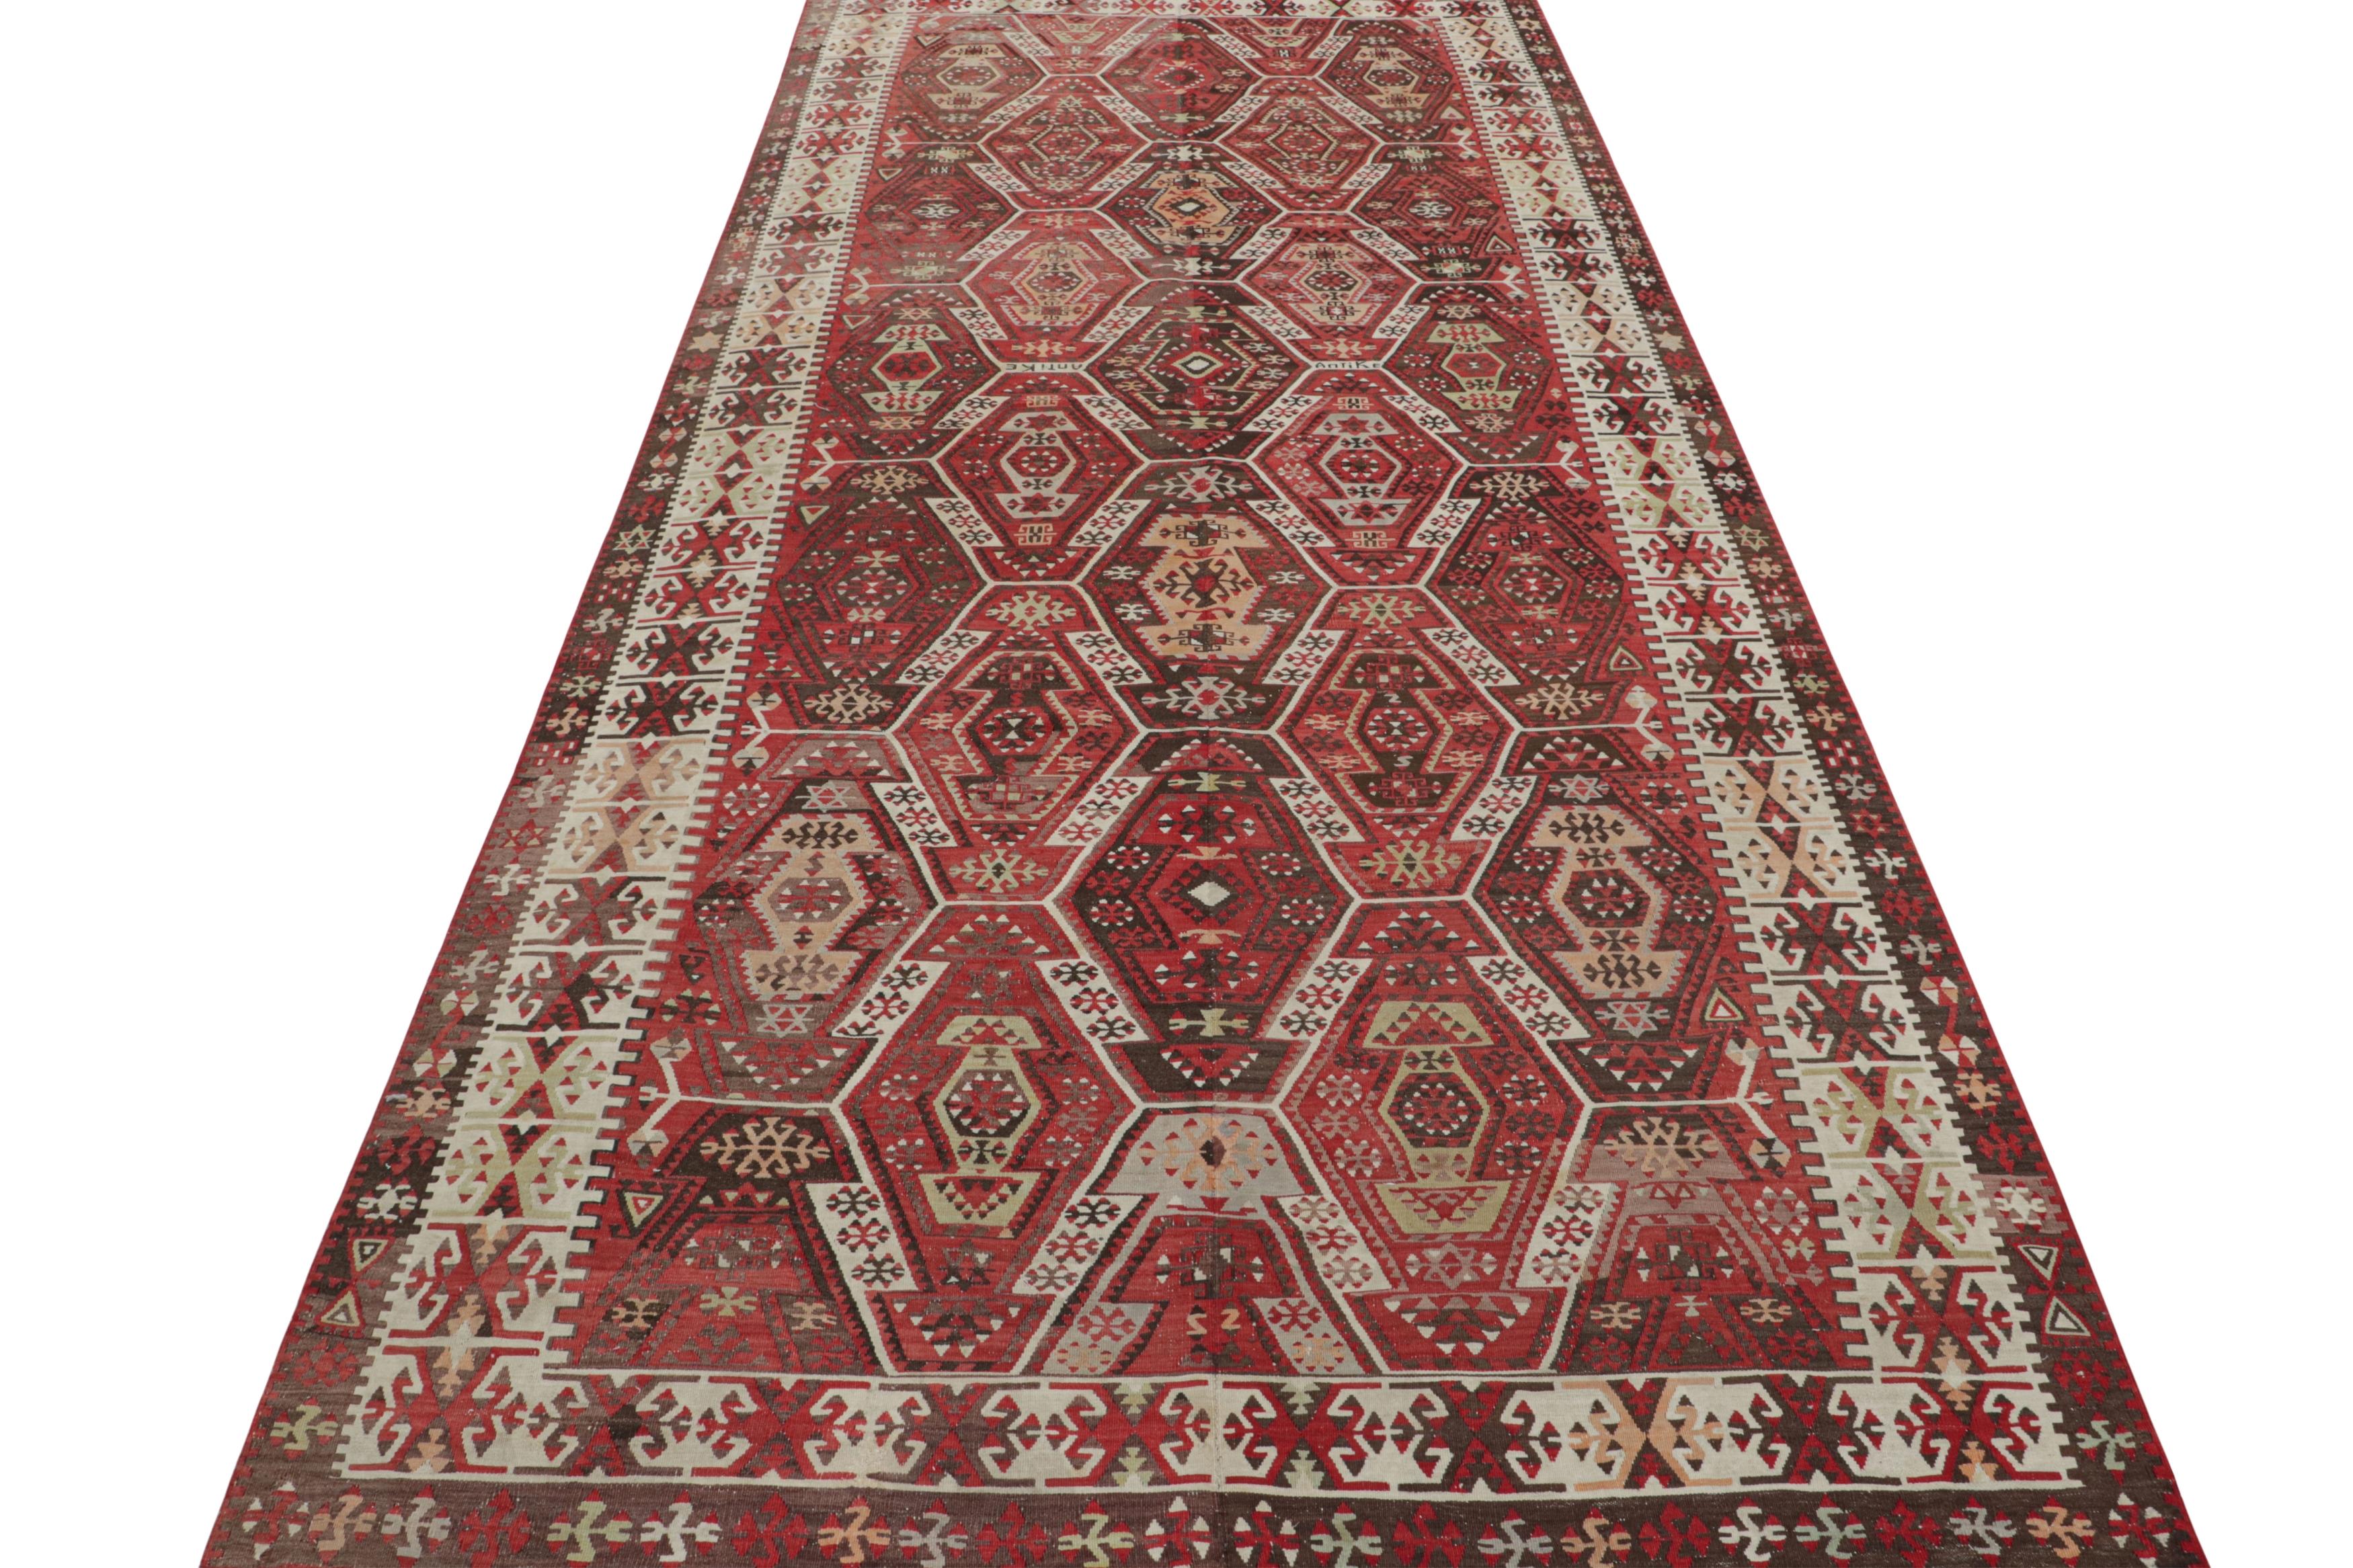 Vintage Kayseri Crimson Red and Beige Wool Kilim Rug In Excellent Condition For Sale In Long Island City, NY